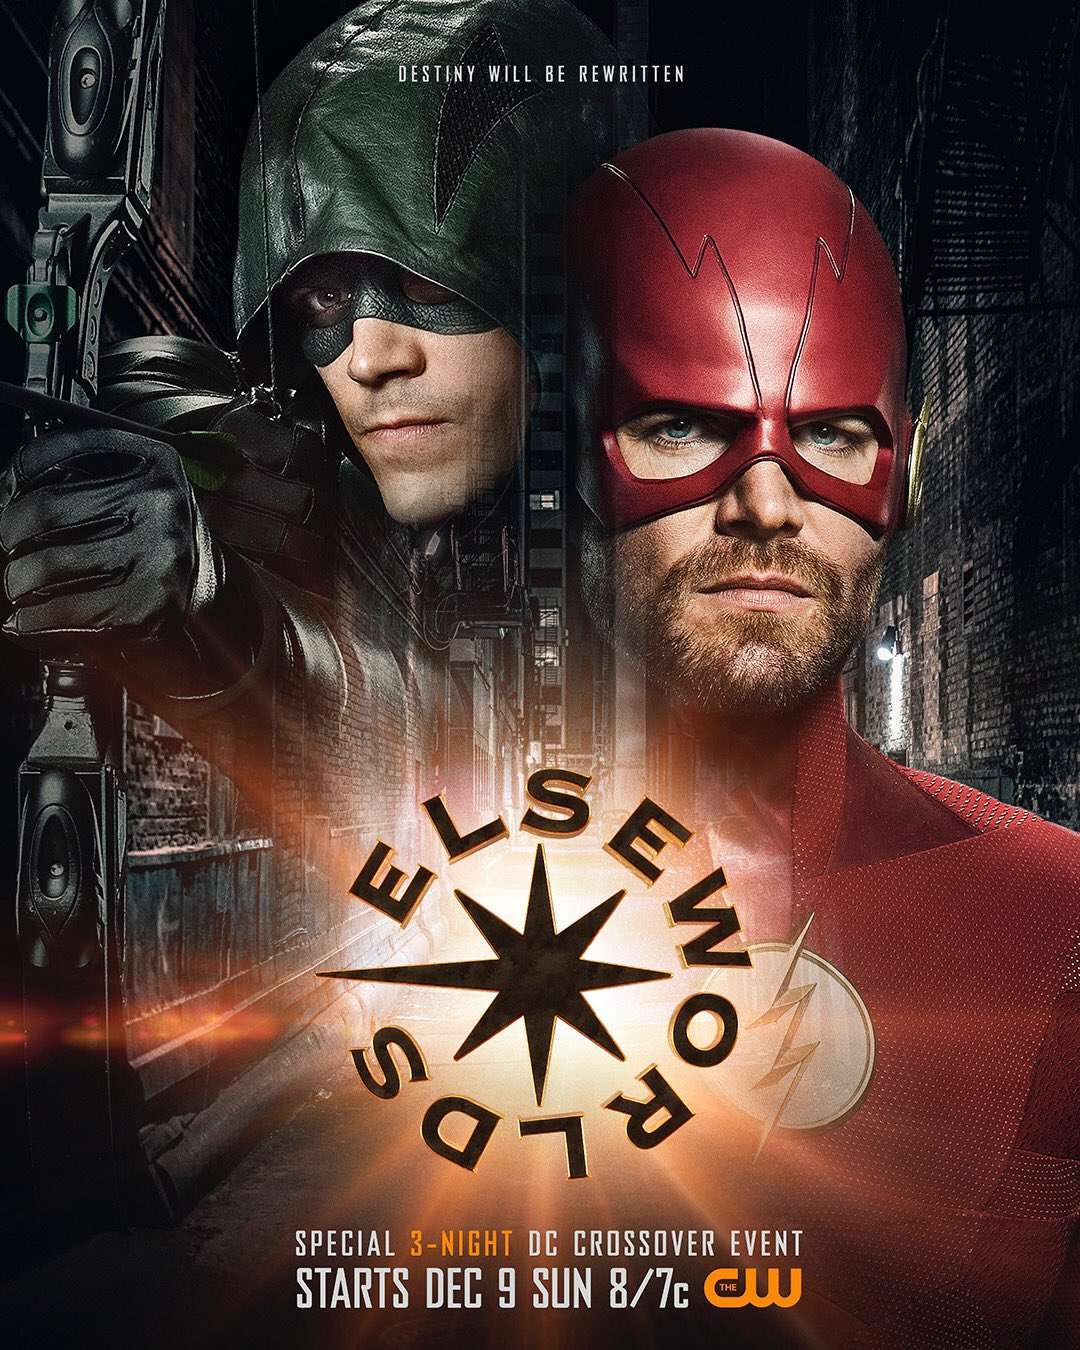 the-flash-is-green-arrow-and-green-arrow-is-the-flash-in-this-new-poster-for-elseworlds-arrowverse-crossover